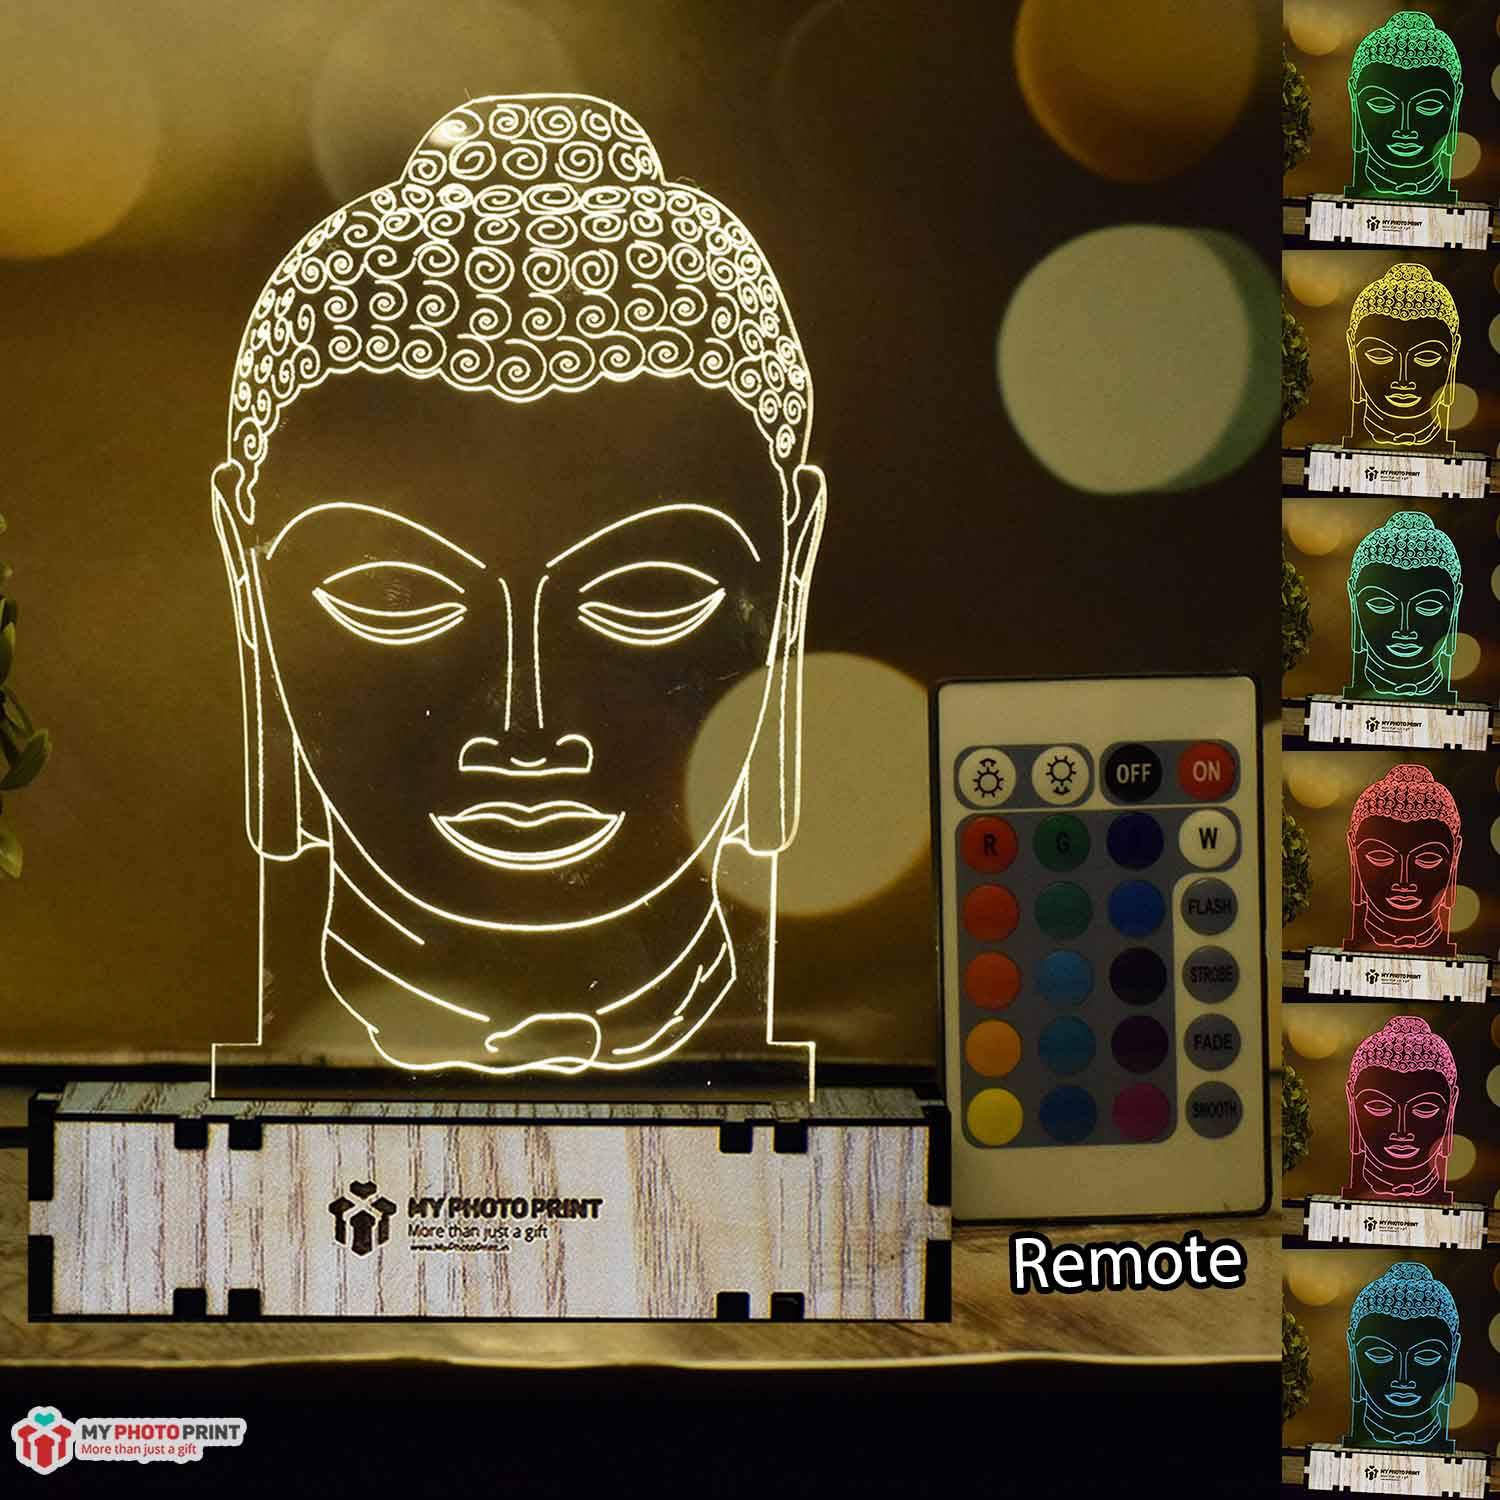 Buddha Acrylic 3D illusion LED Lamp with Color Changing Led and Remote#1404